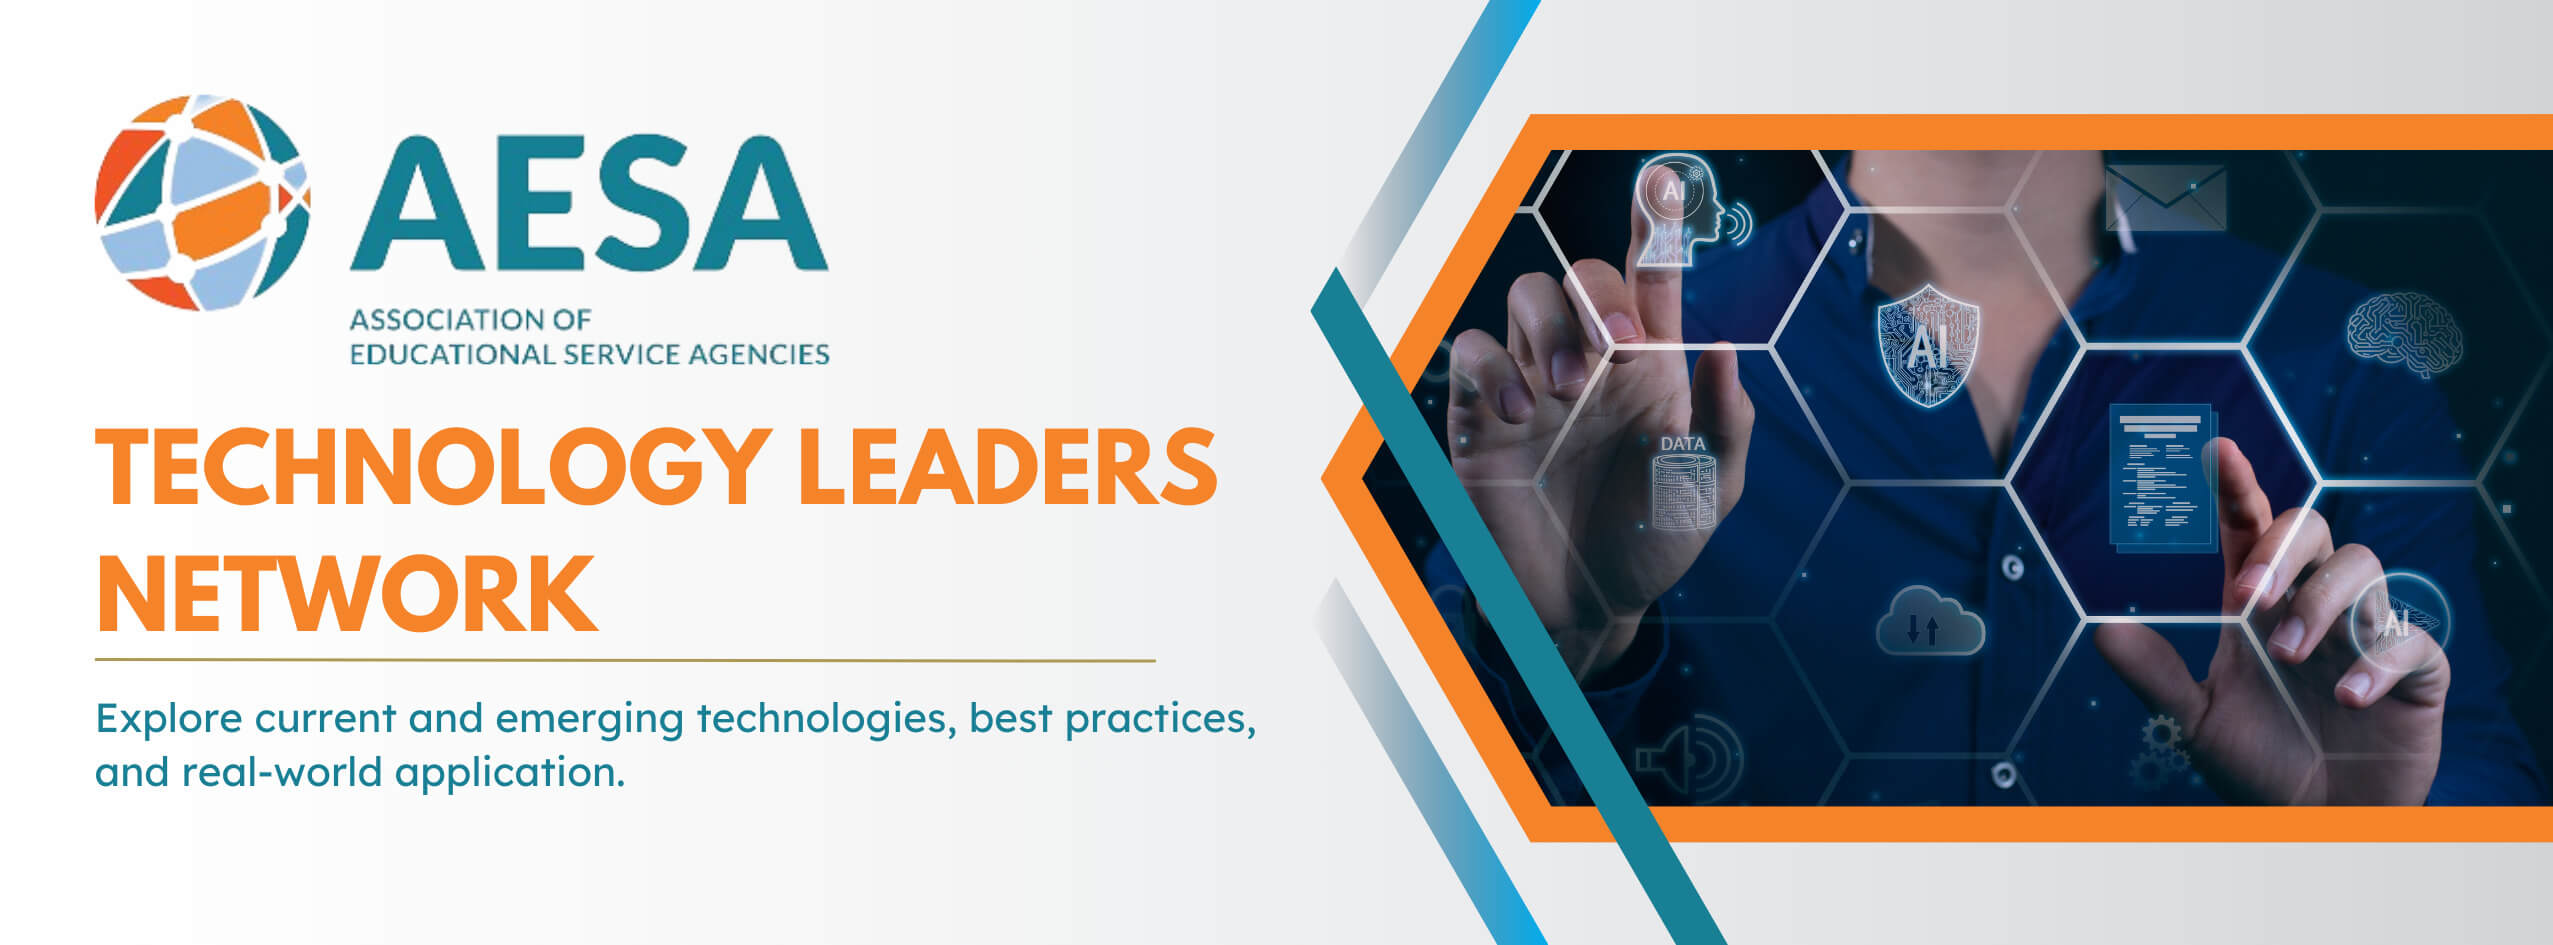 Technology leaders network banner with picture depicting artificial intelligence